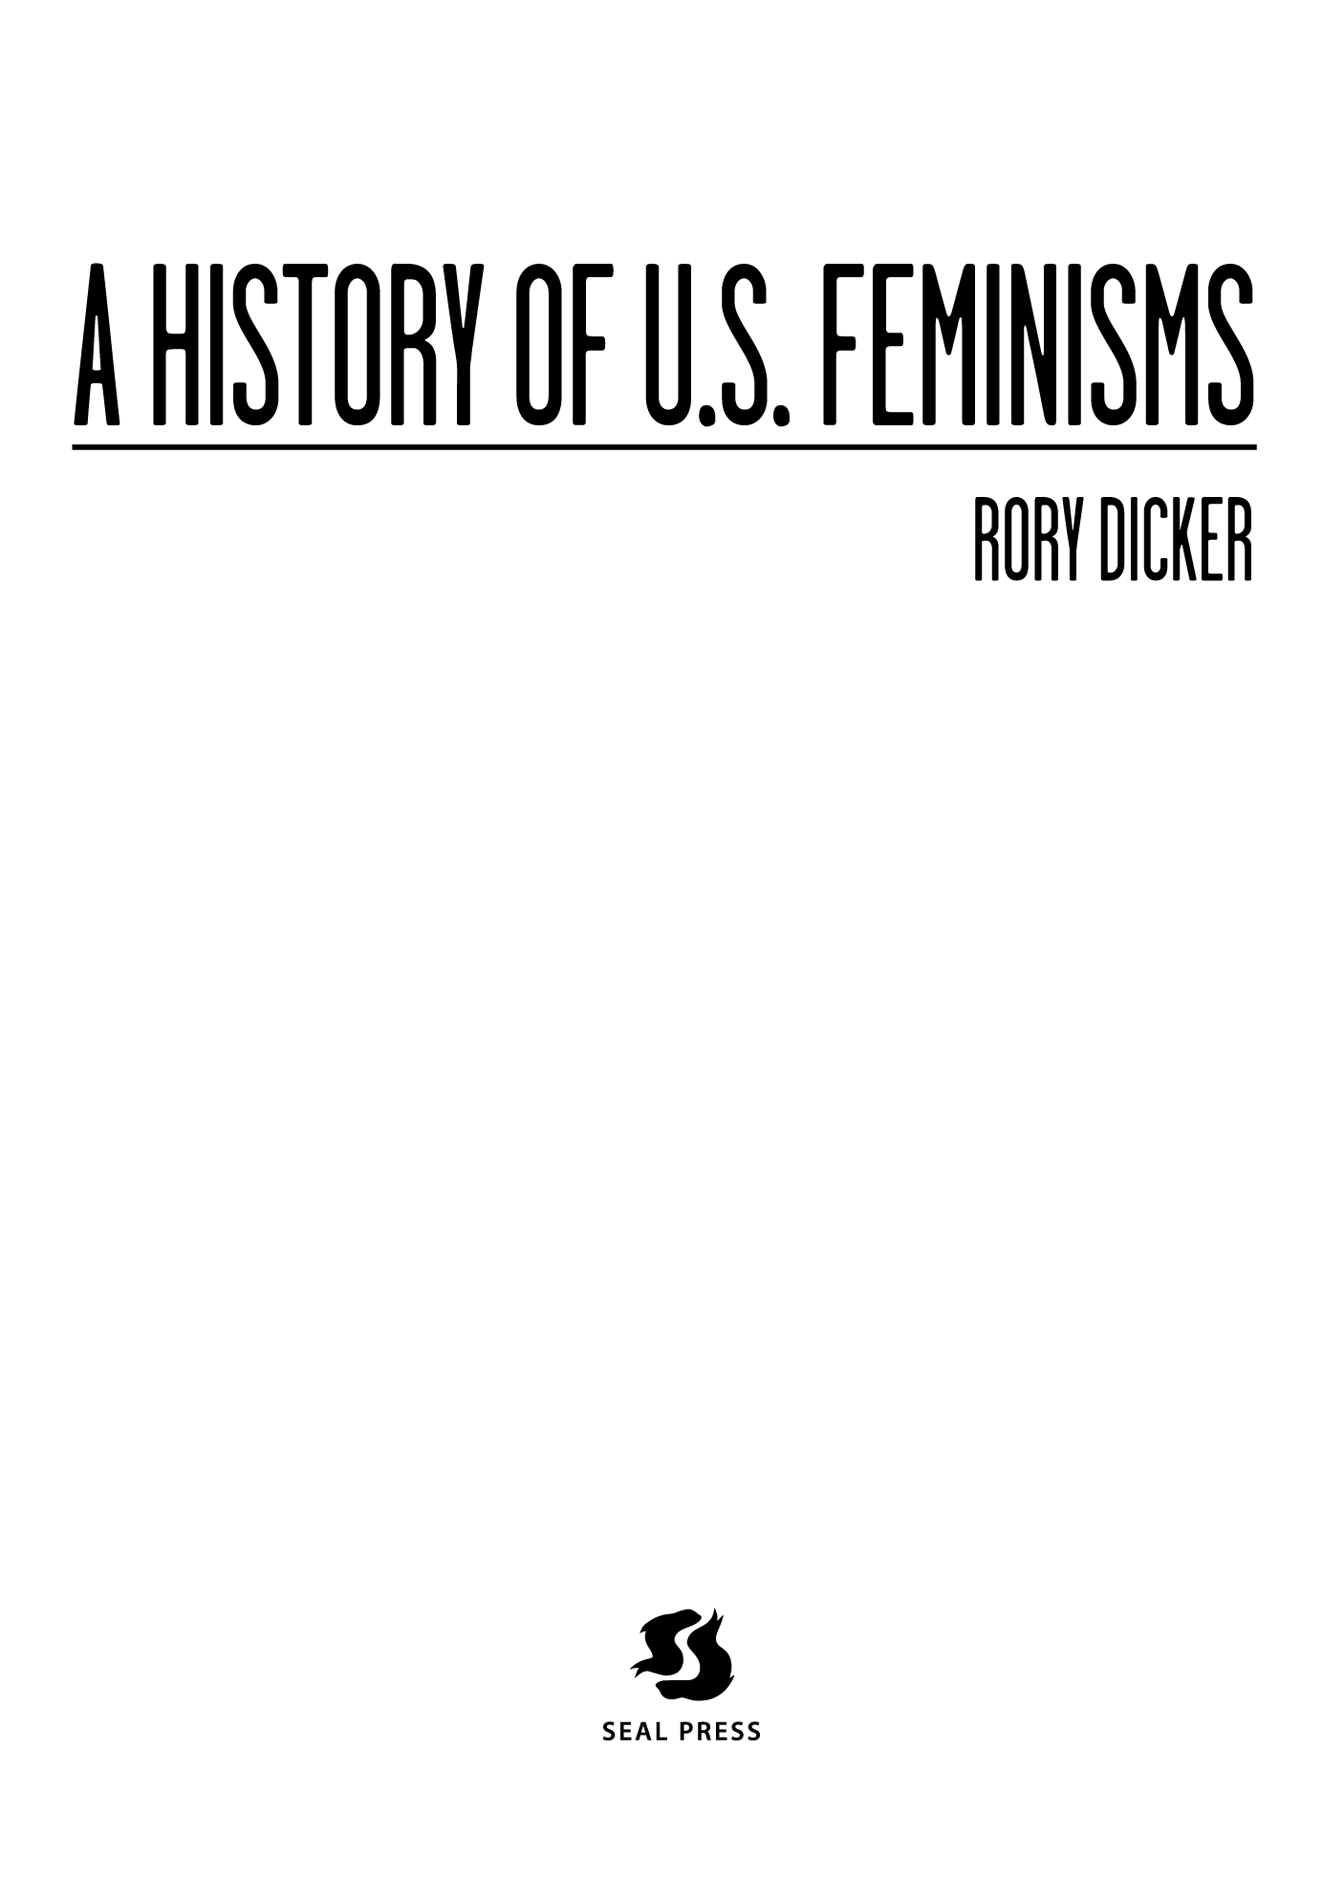 A History of US Feminisms 2016 2008 Rory Dicker Published by Seal Press a - photo 3